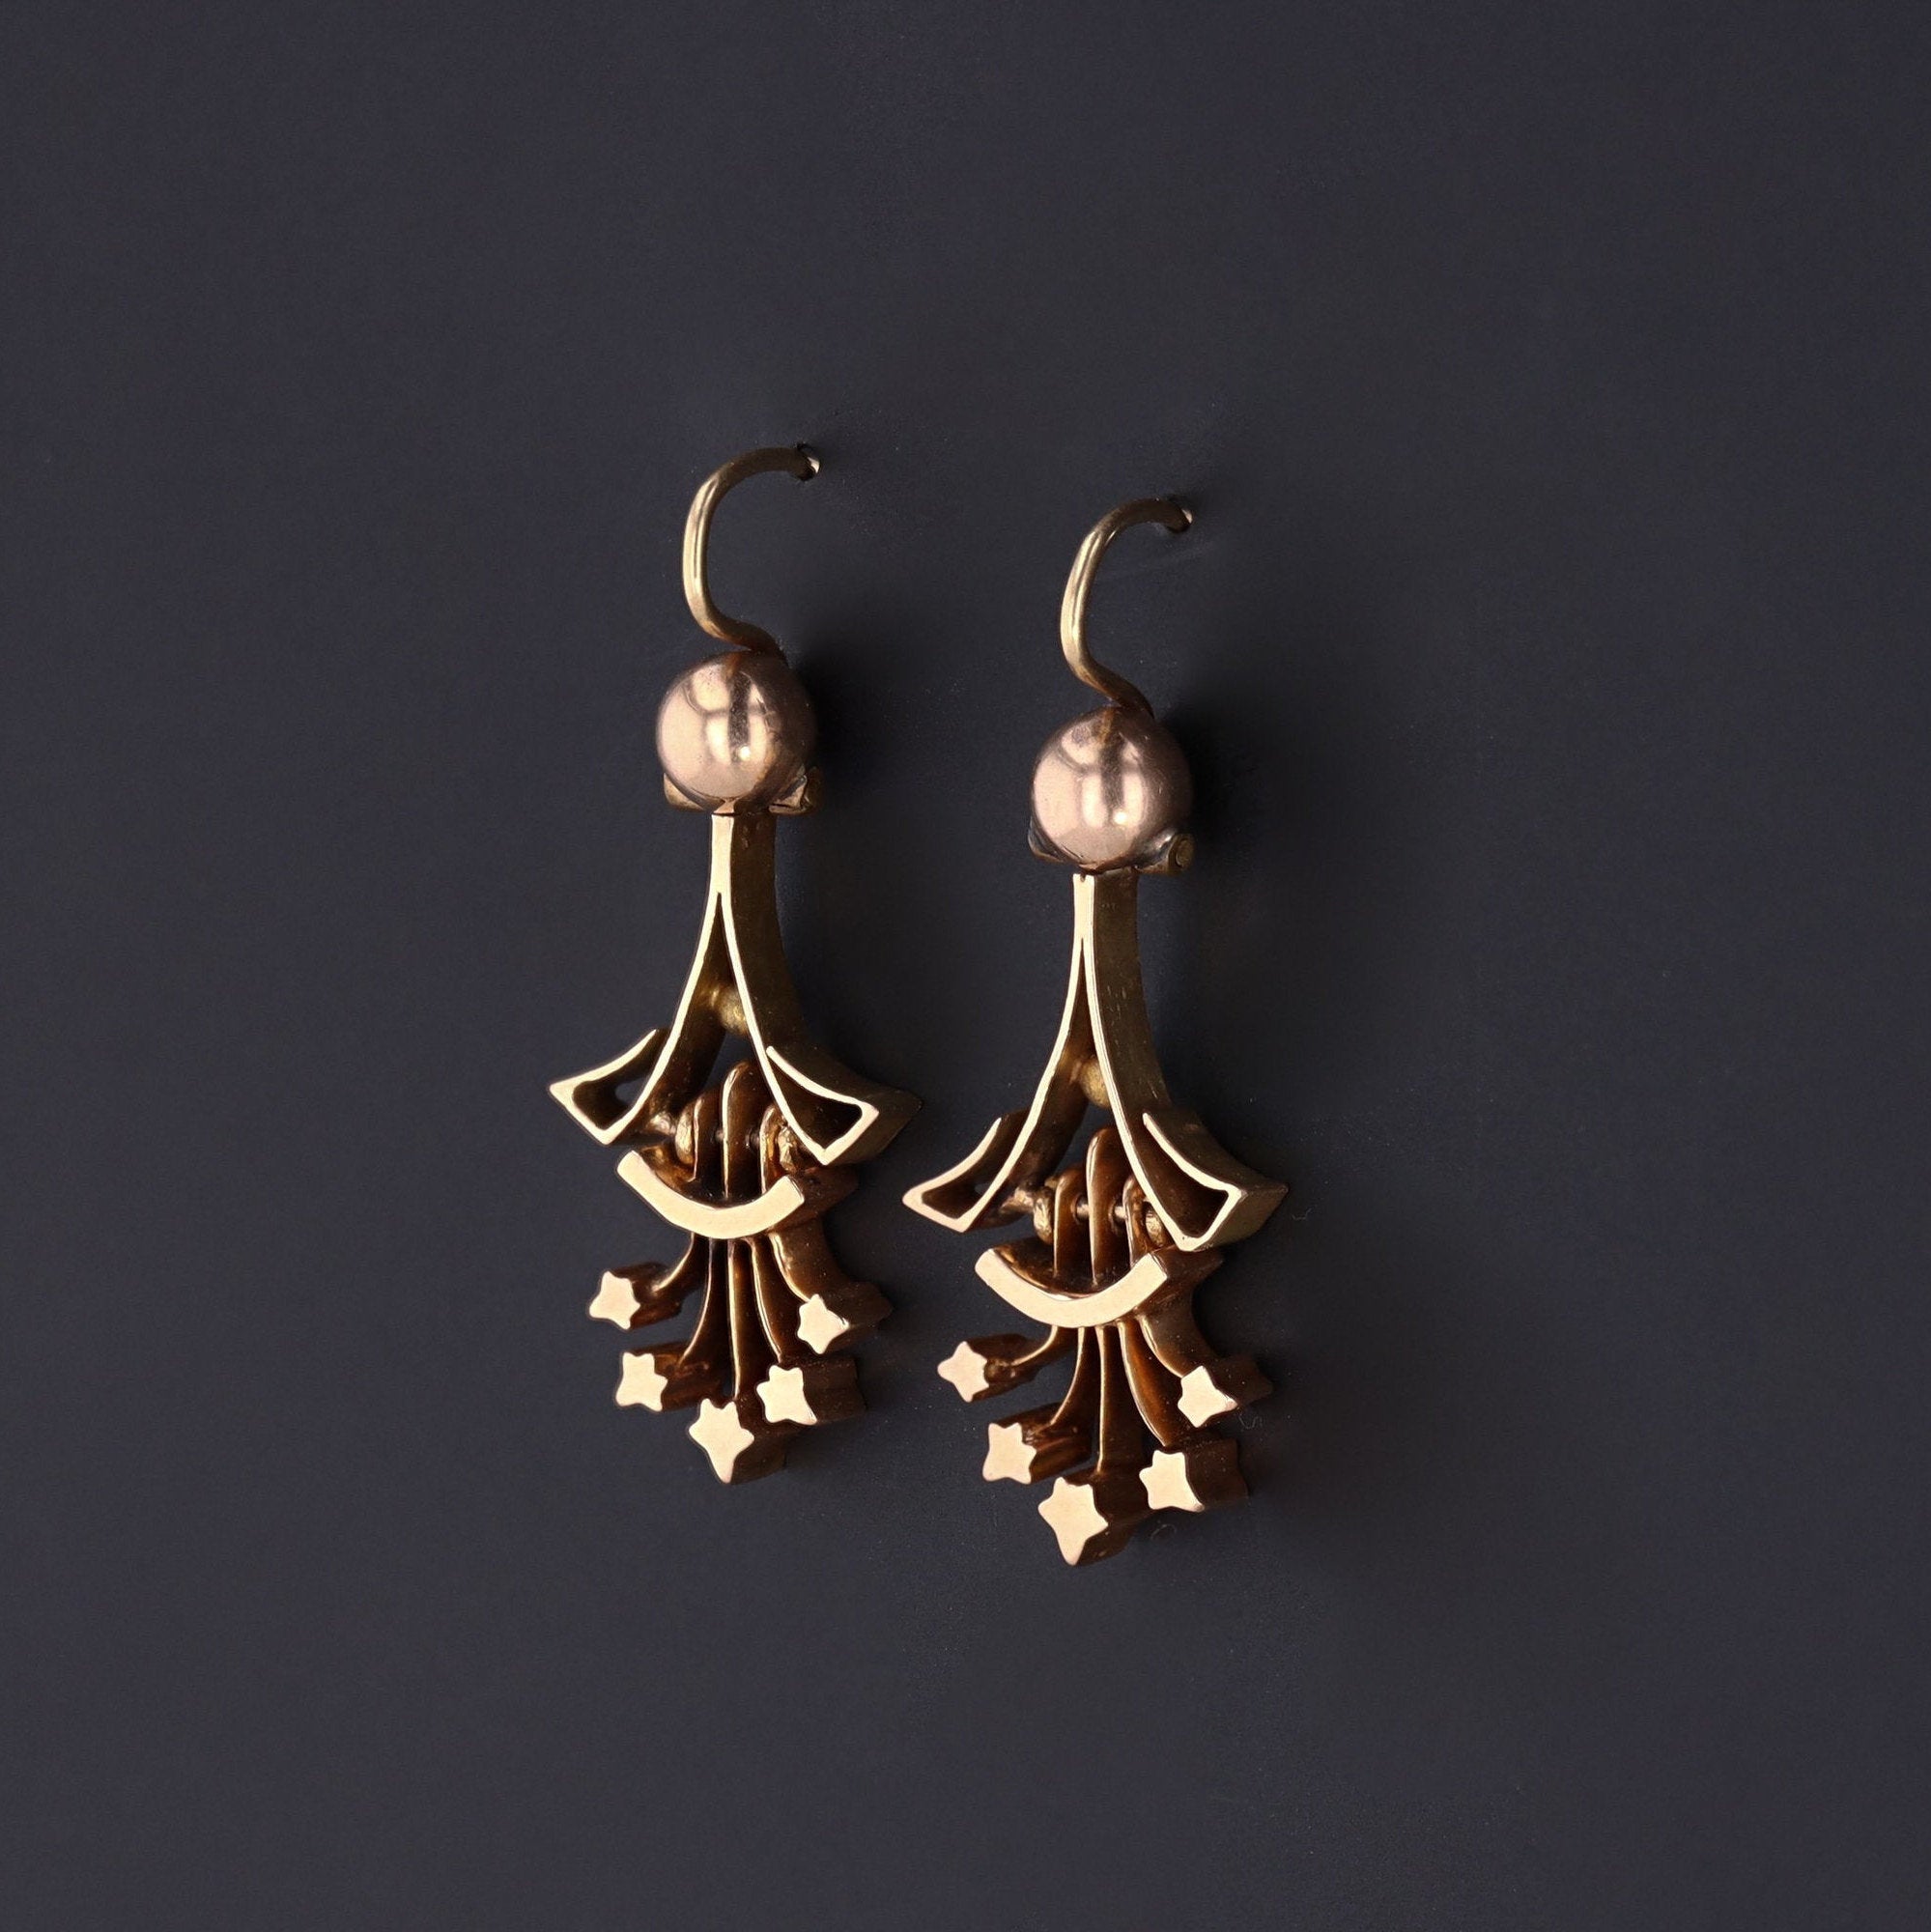 Antique Gold Earrings | 14k Gold Victorian Earrings | Antique Earrings | Dangle Earrings